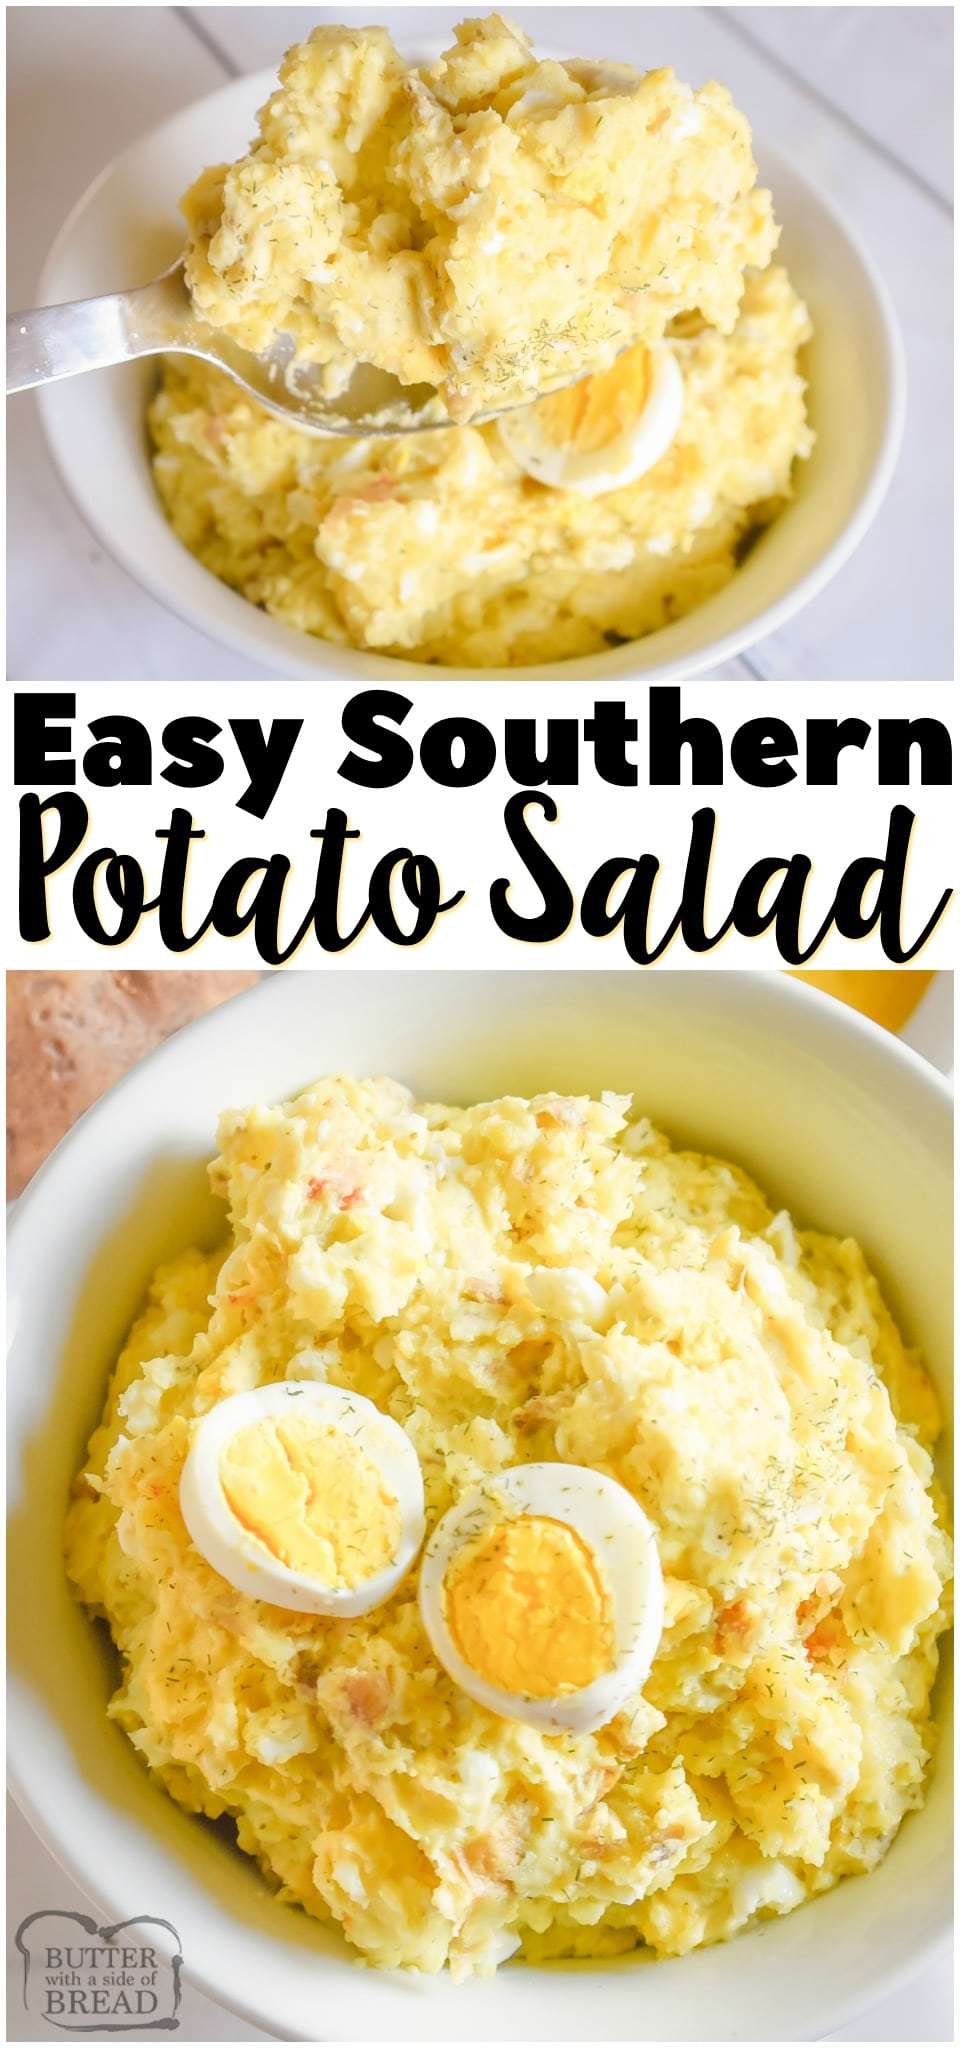 Southern Potato Salad recipe perfect for summer bbq's and get-togethers! Easy potato salad made with Yukon gold potatoes, hard boiled eggs and a simple tangy dressing. #salad #potatoes #potatosalad #southern #recipe #bbq #summer from BUTTER WITH A SIDE OF BREAD